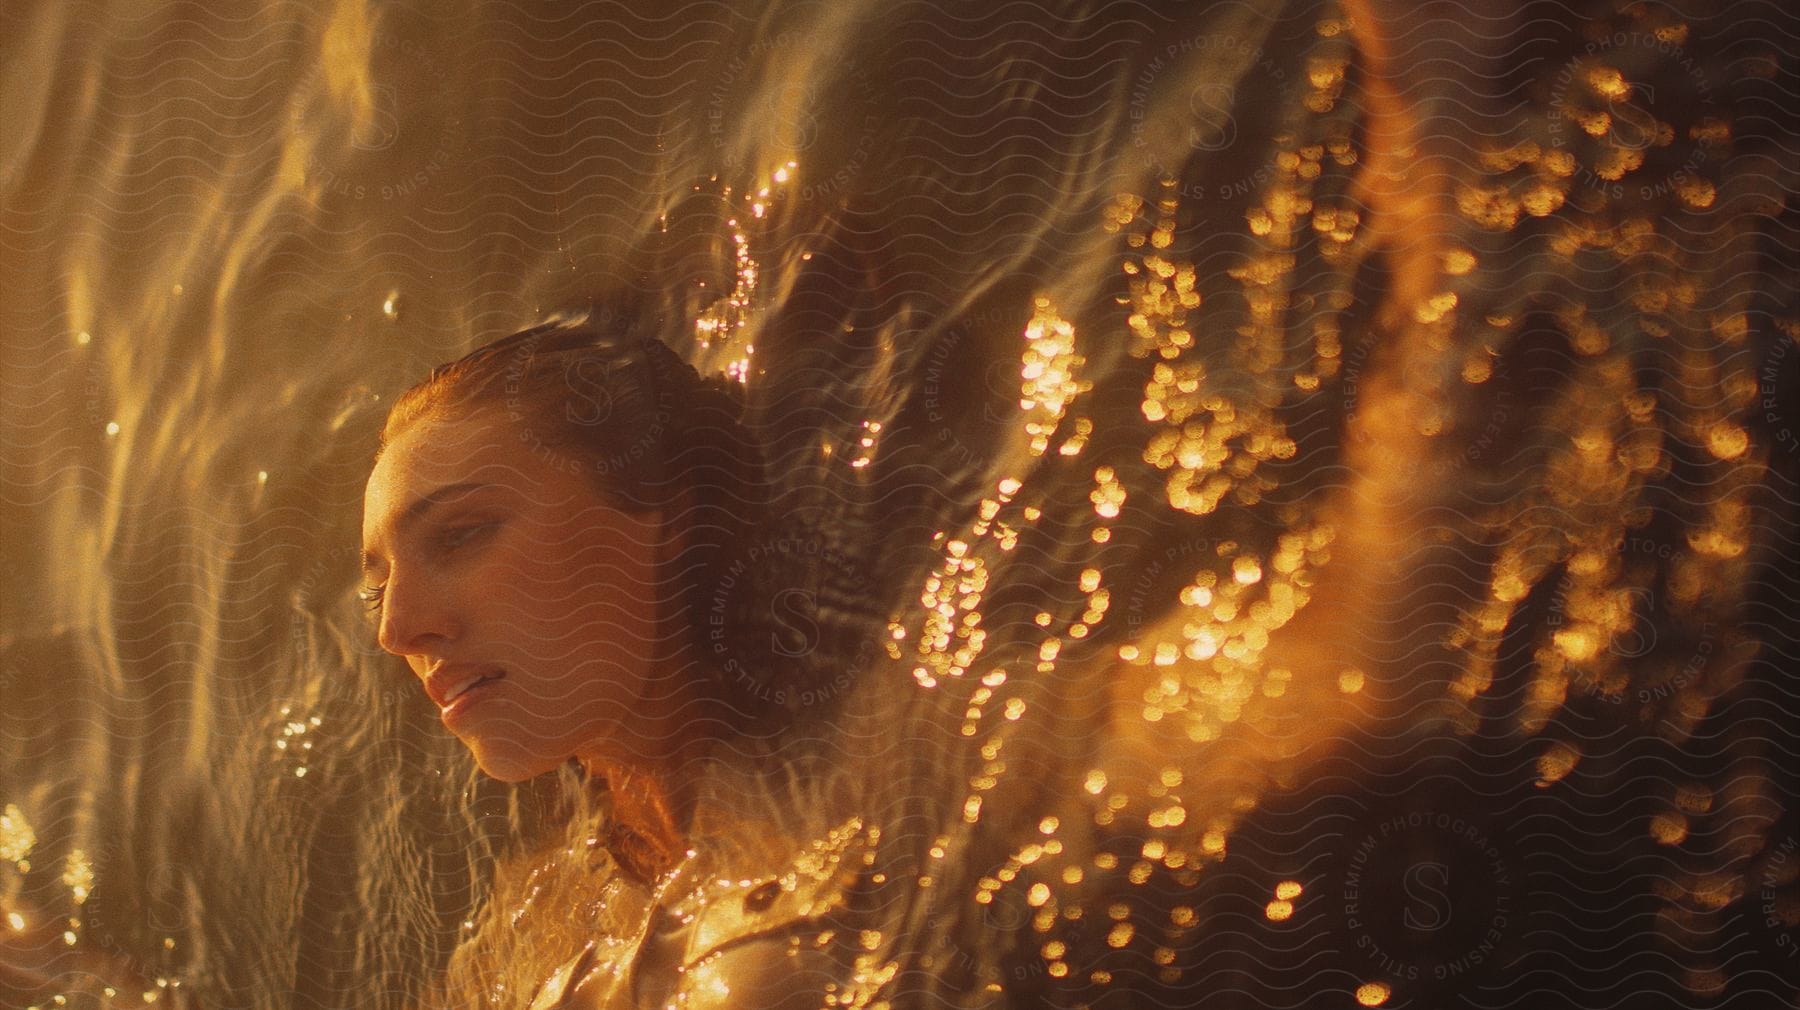 Golden sunlight shines on a woman's face and illuminates the water as she floats on her back